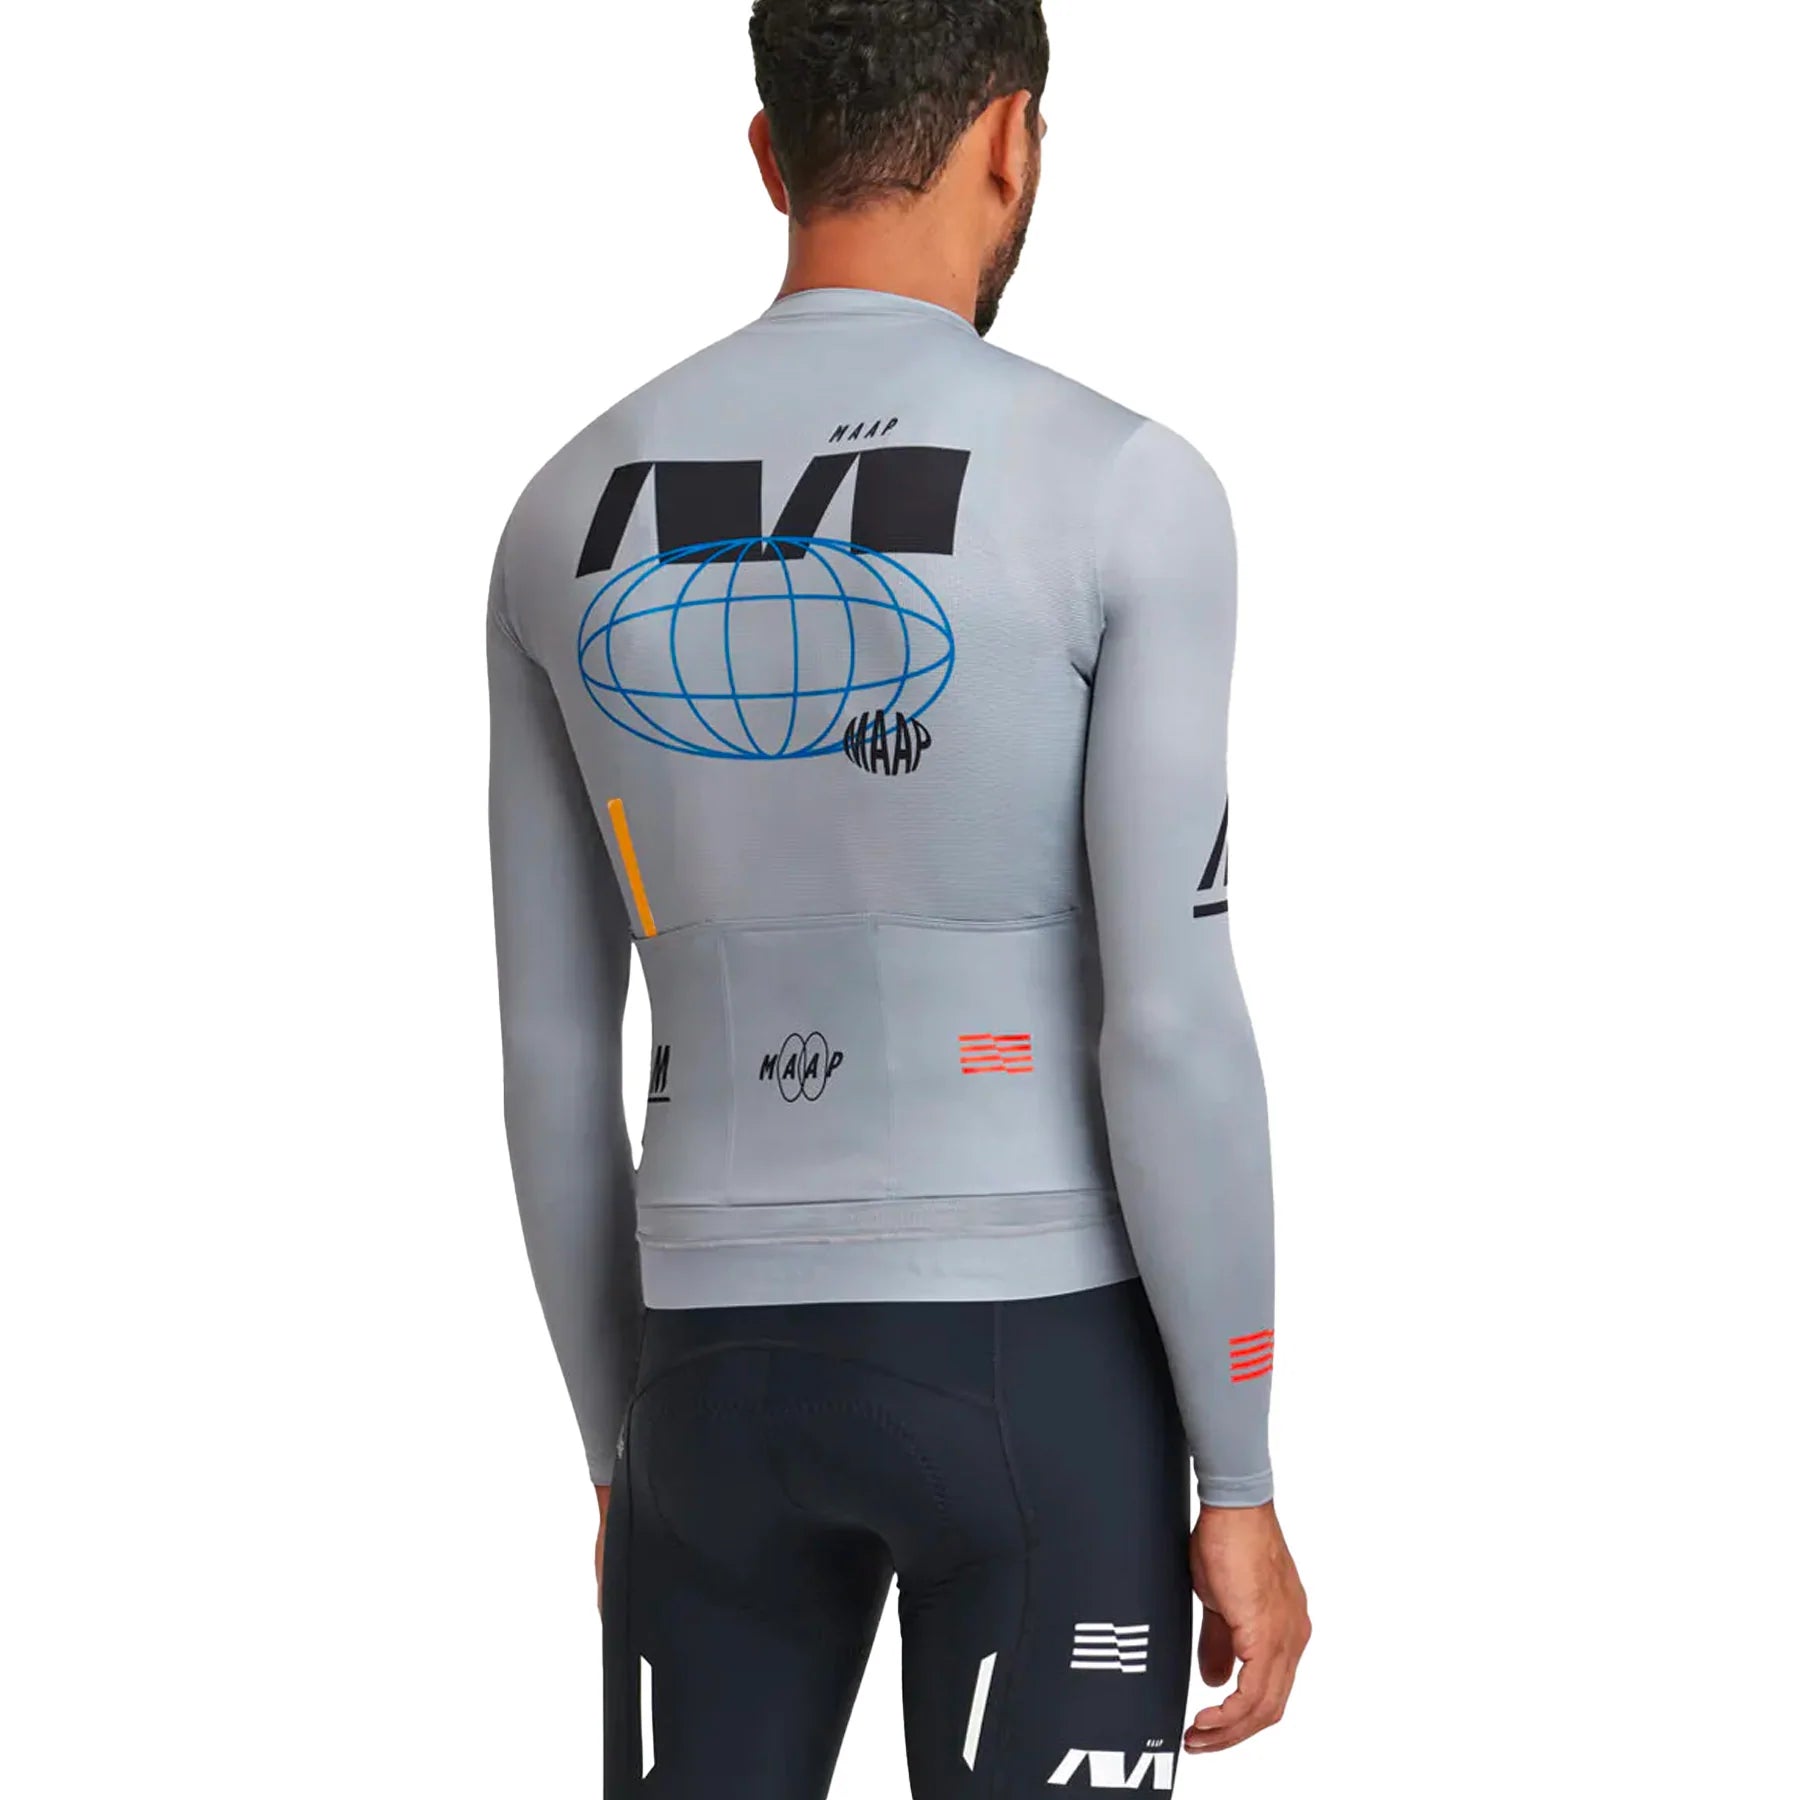 Axis Pro Jersey LS - Storm